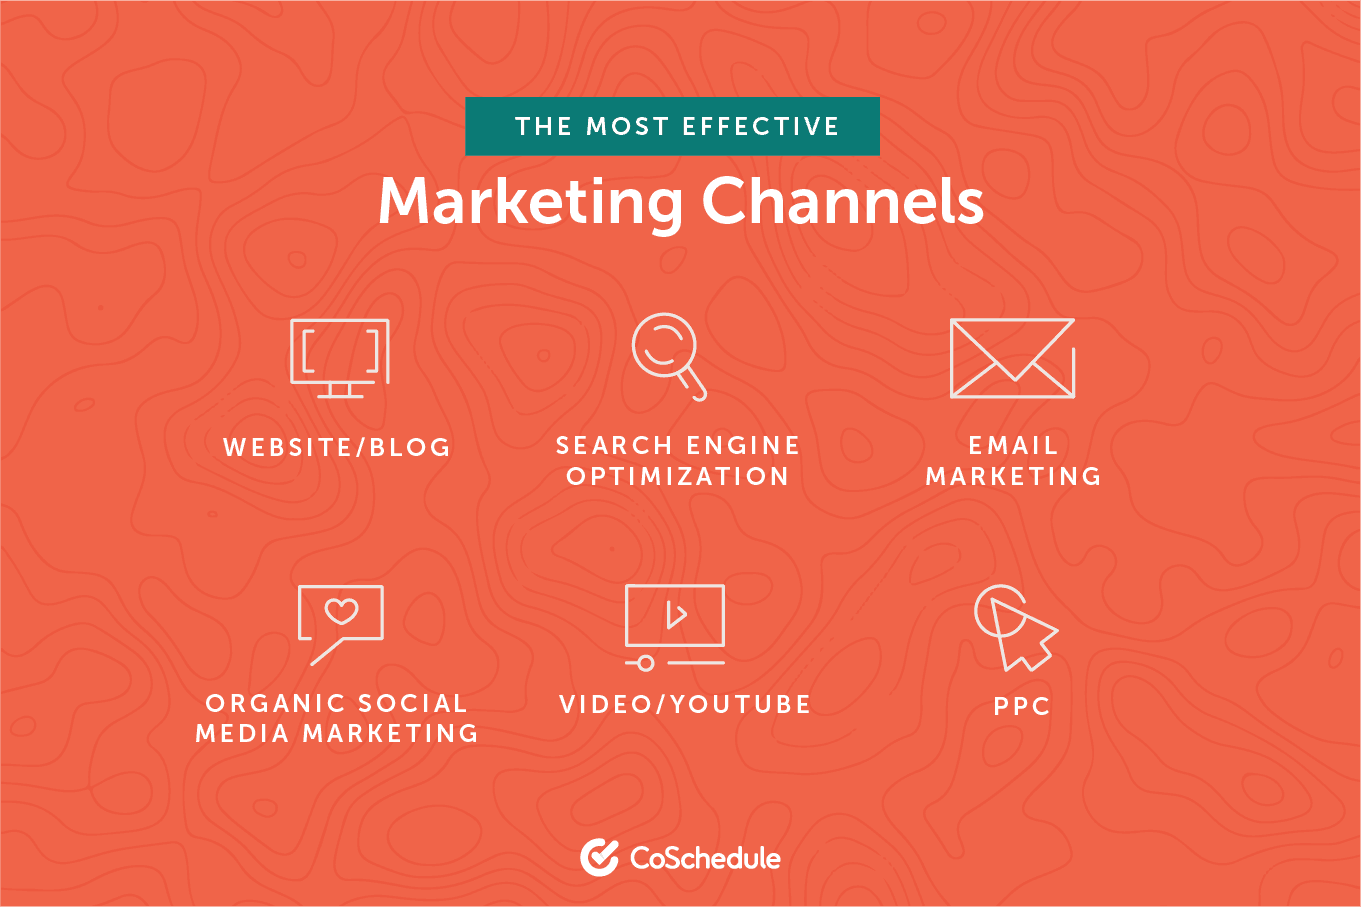 List of the most effective marketing channels